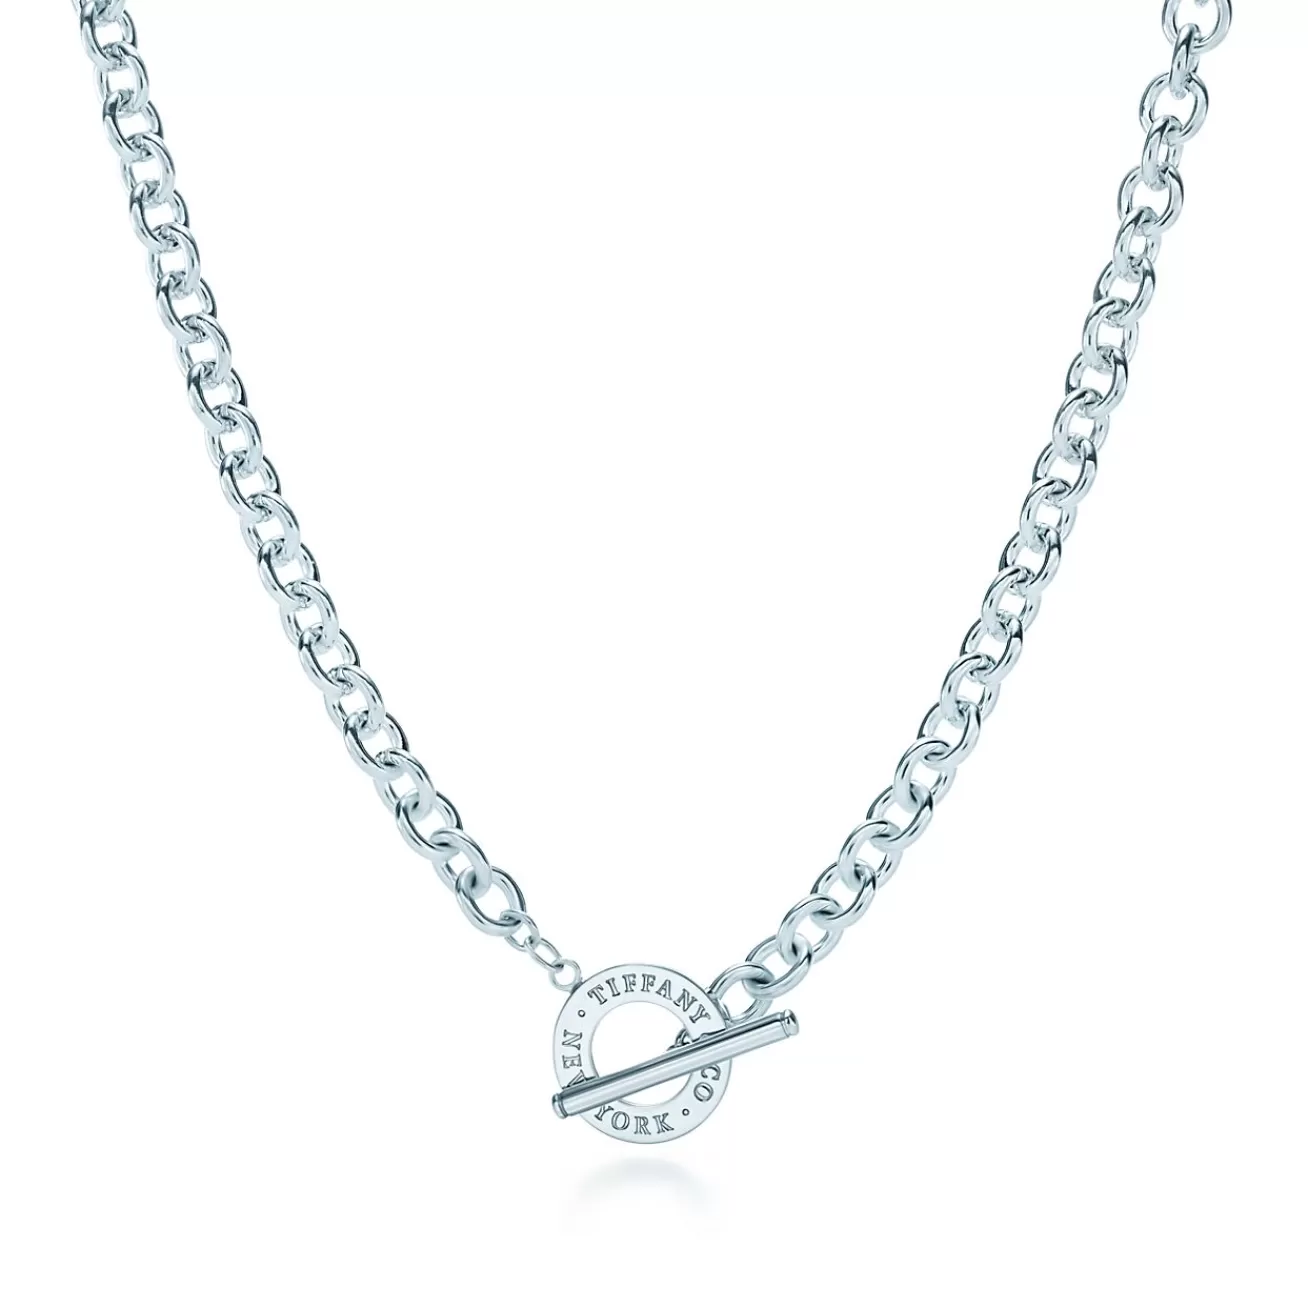 Tiffany & Co. Toggle necklace in sterling silver. | ^ Necklaces & Pendants | Sterling Silver Jewelry